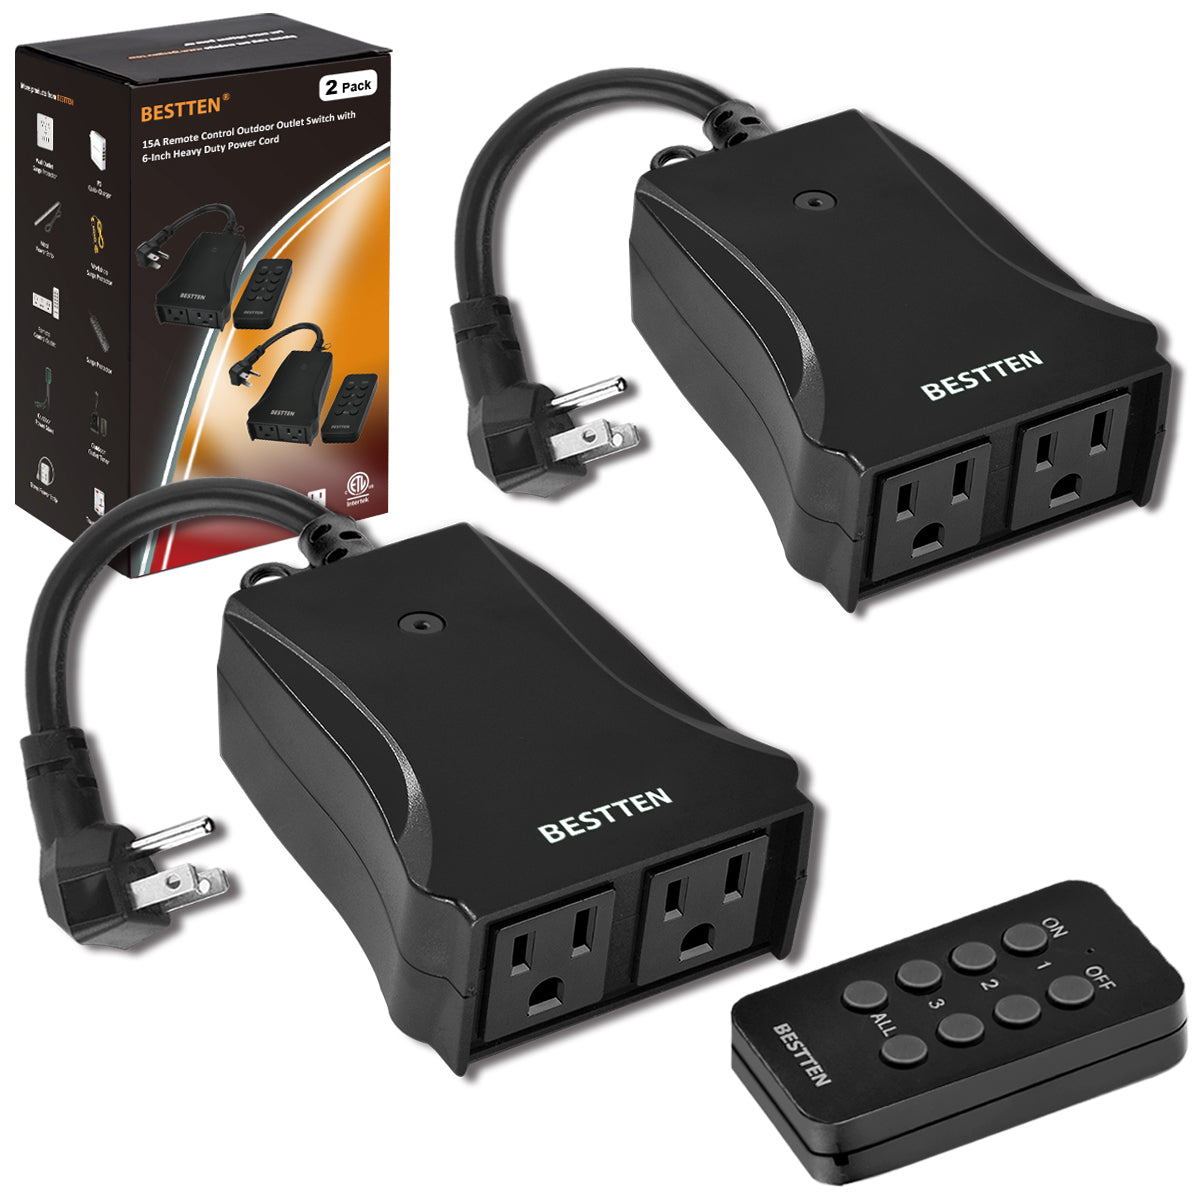 BESTTEN (15A/125V/1875W) Wireless Remote Control Outlet Combo Kit